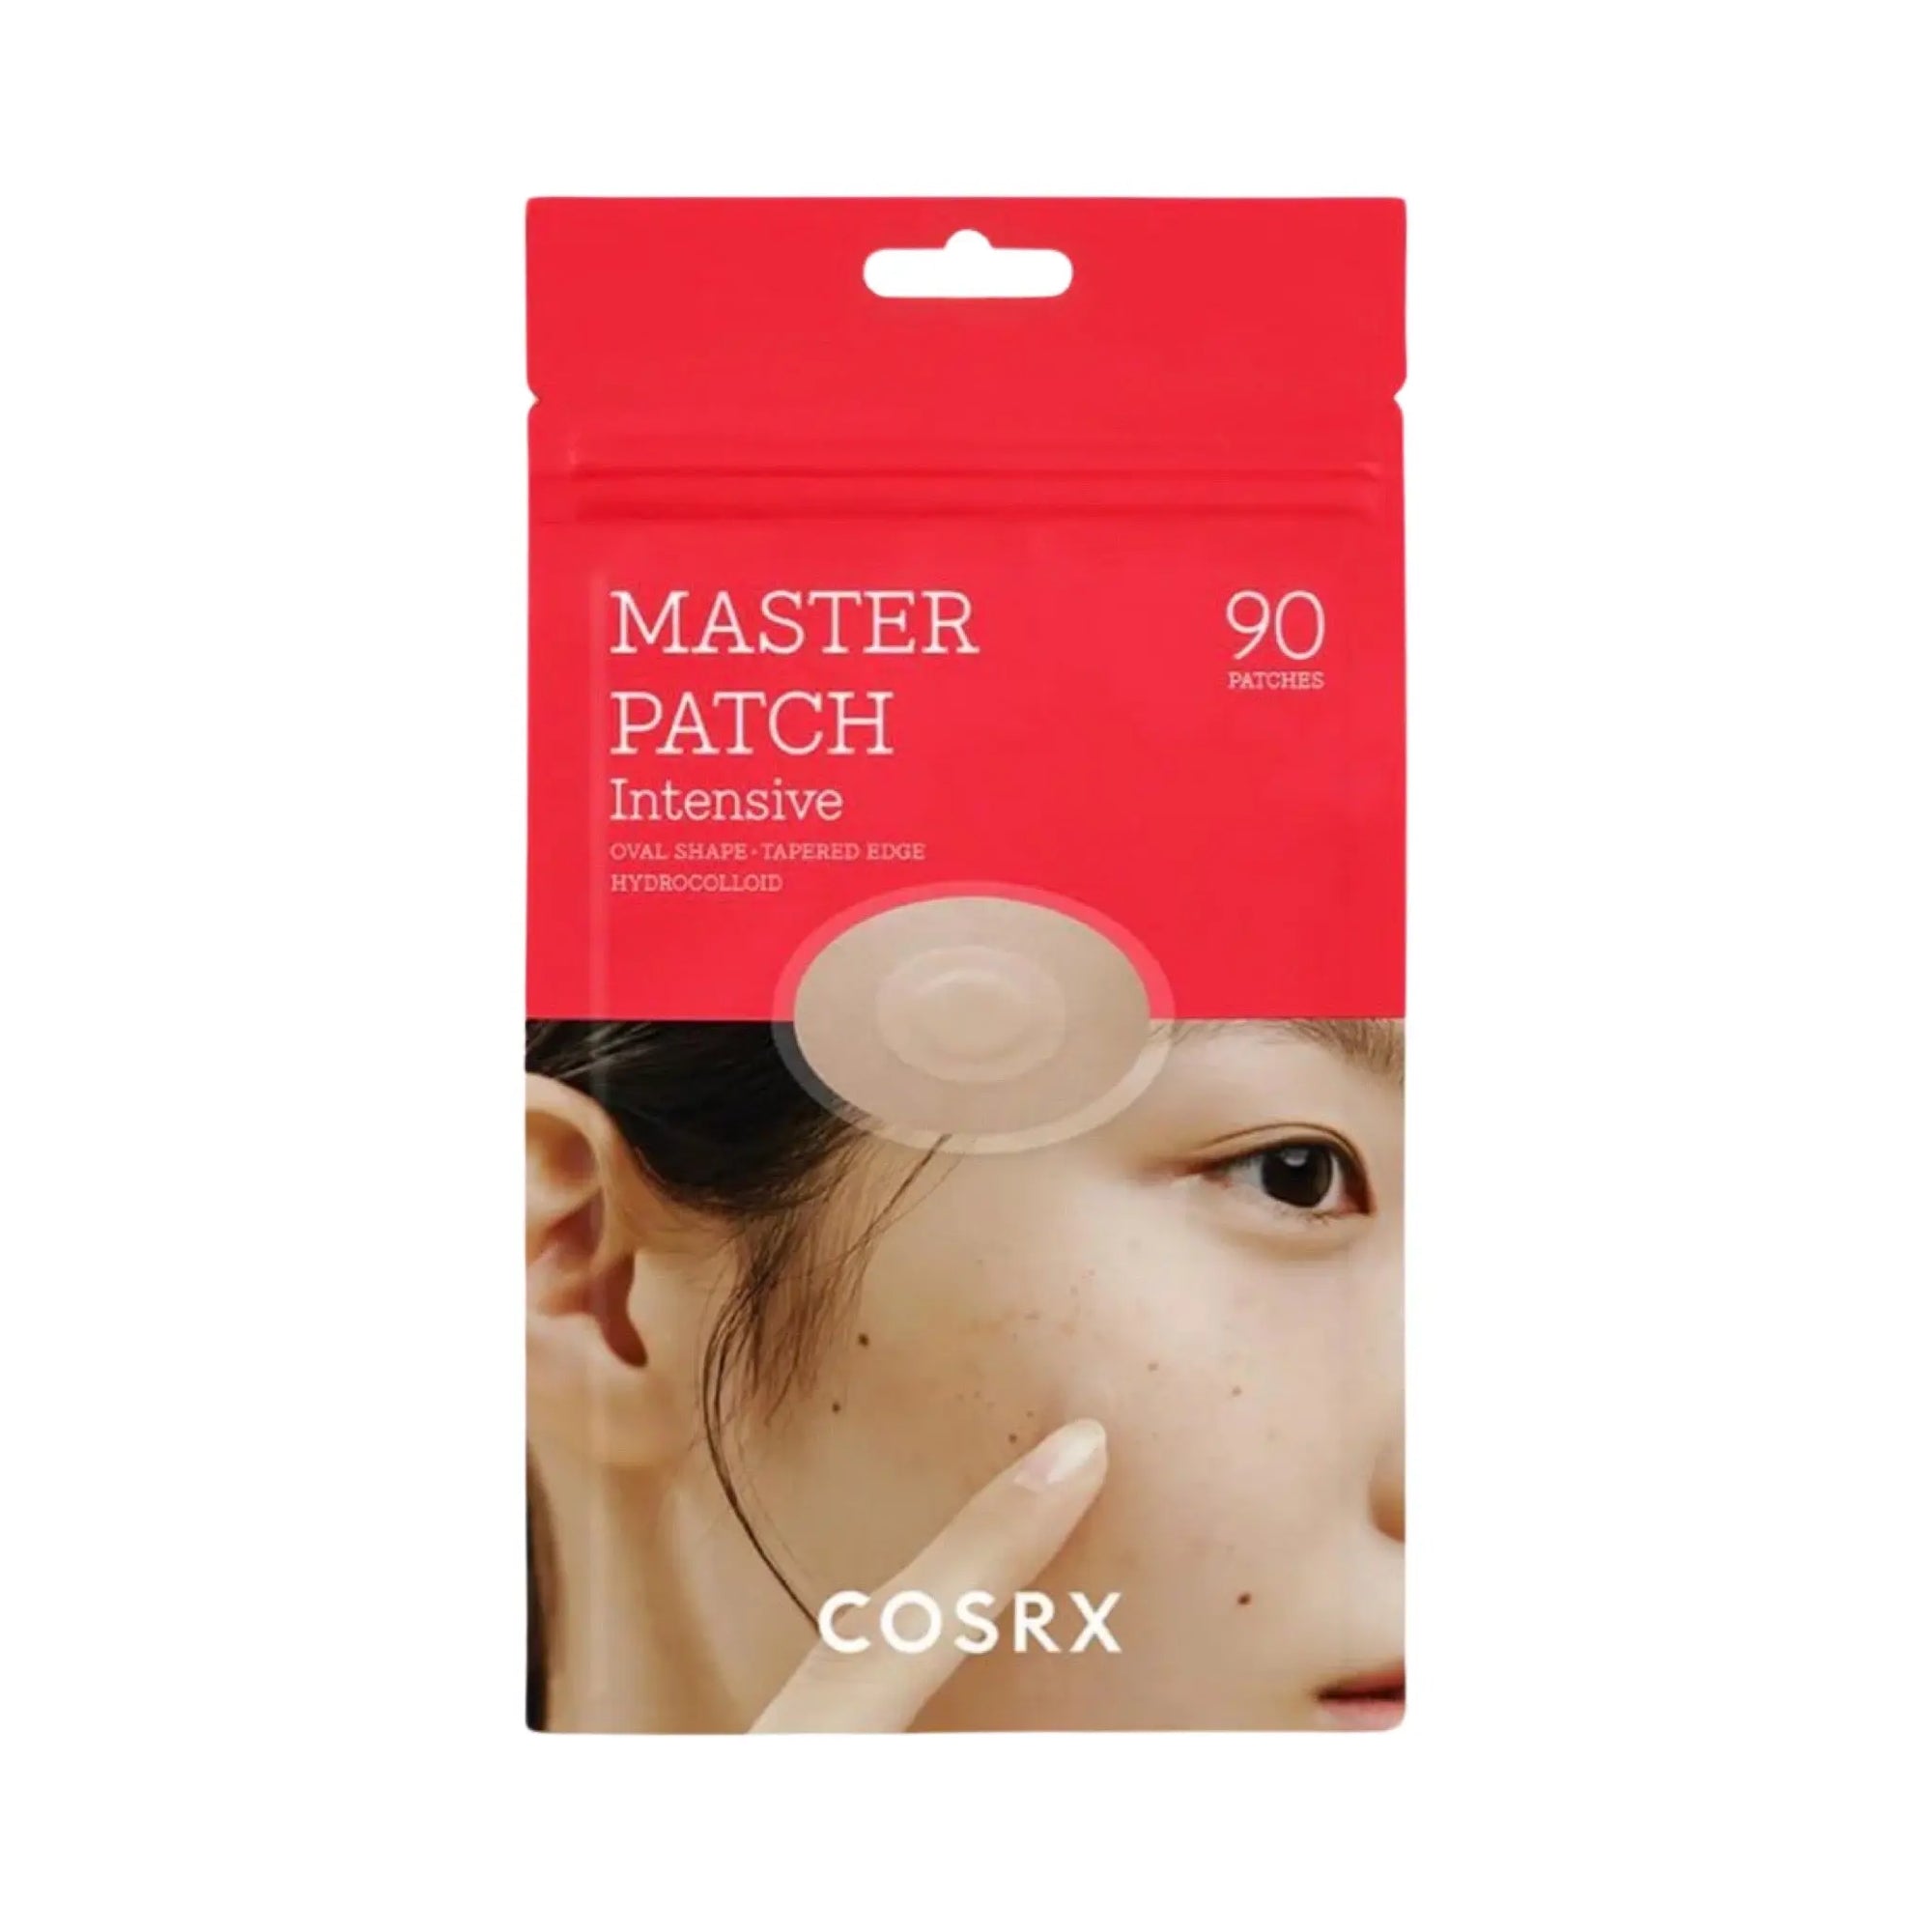 Copy of COSRX - Master Patch Intensive (36 patches) (Exp. 2025-09-07) COSRX